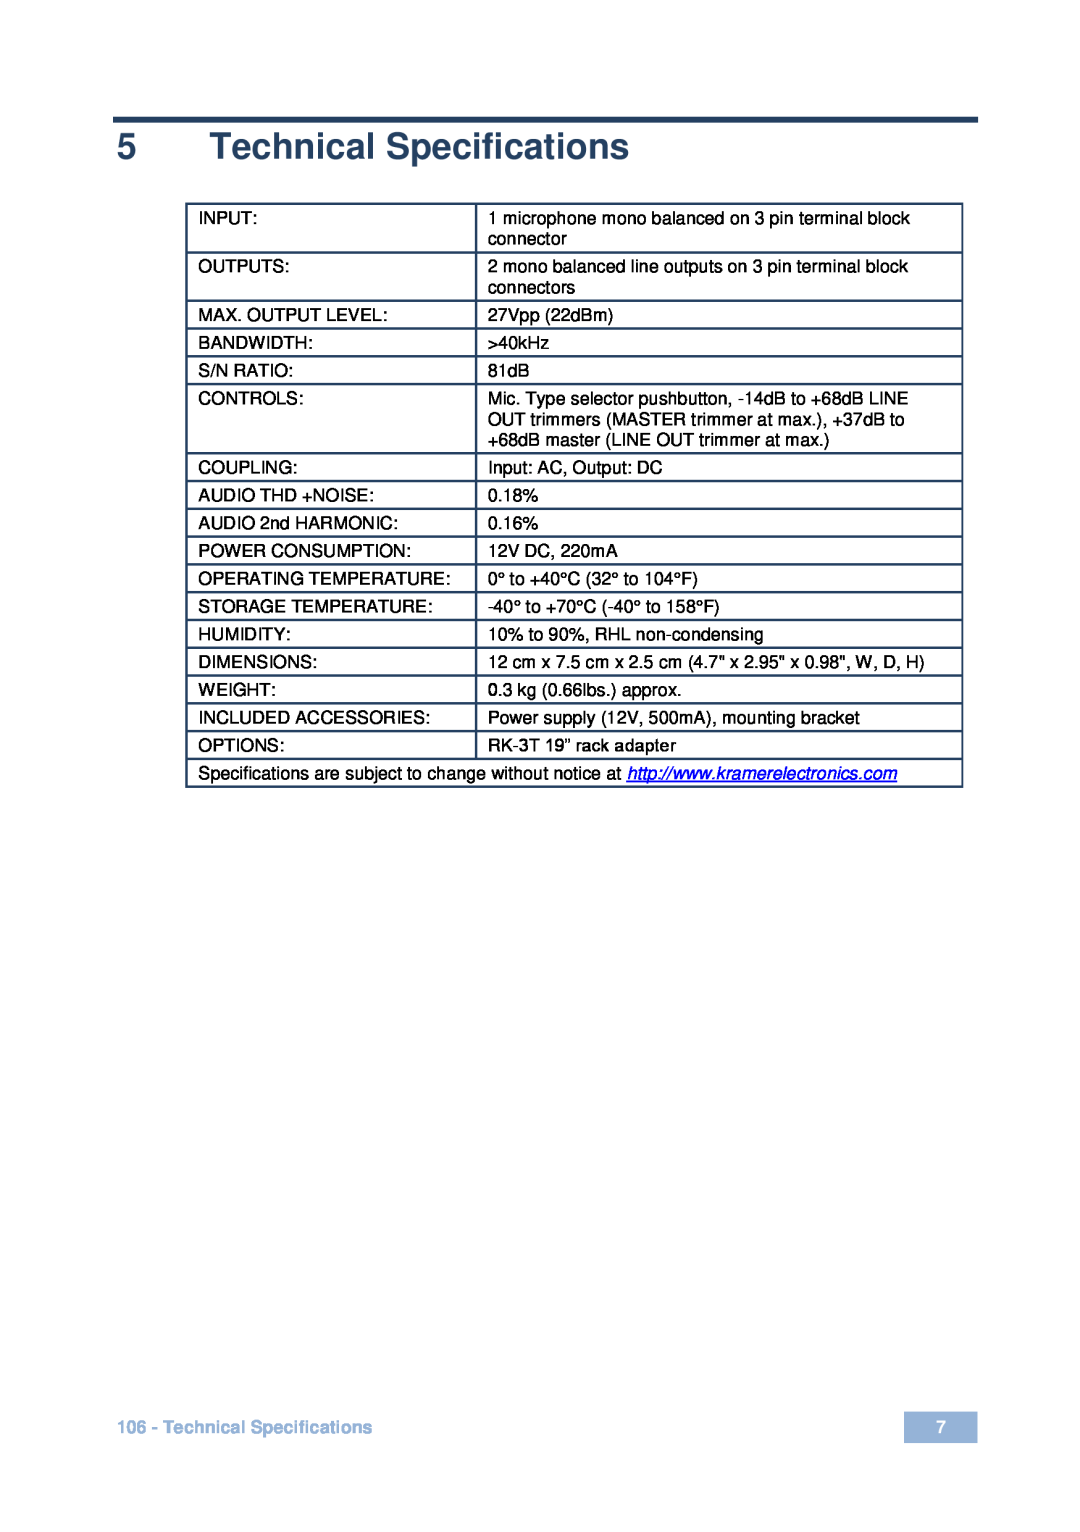 Kramer Electronics 106 user manual Technical Specifications 